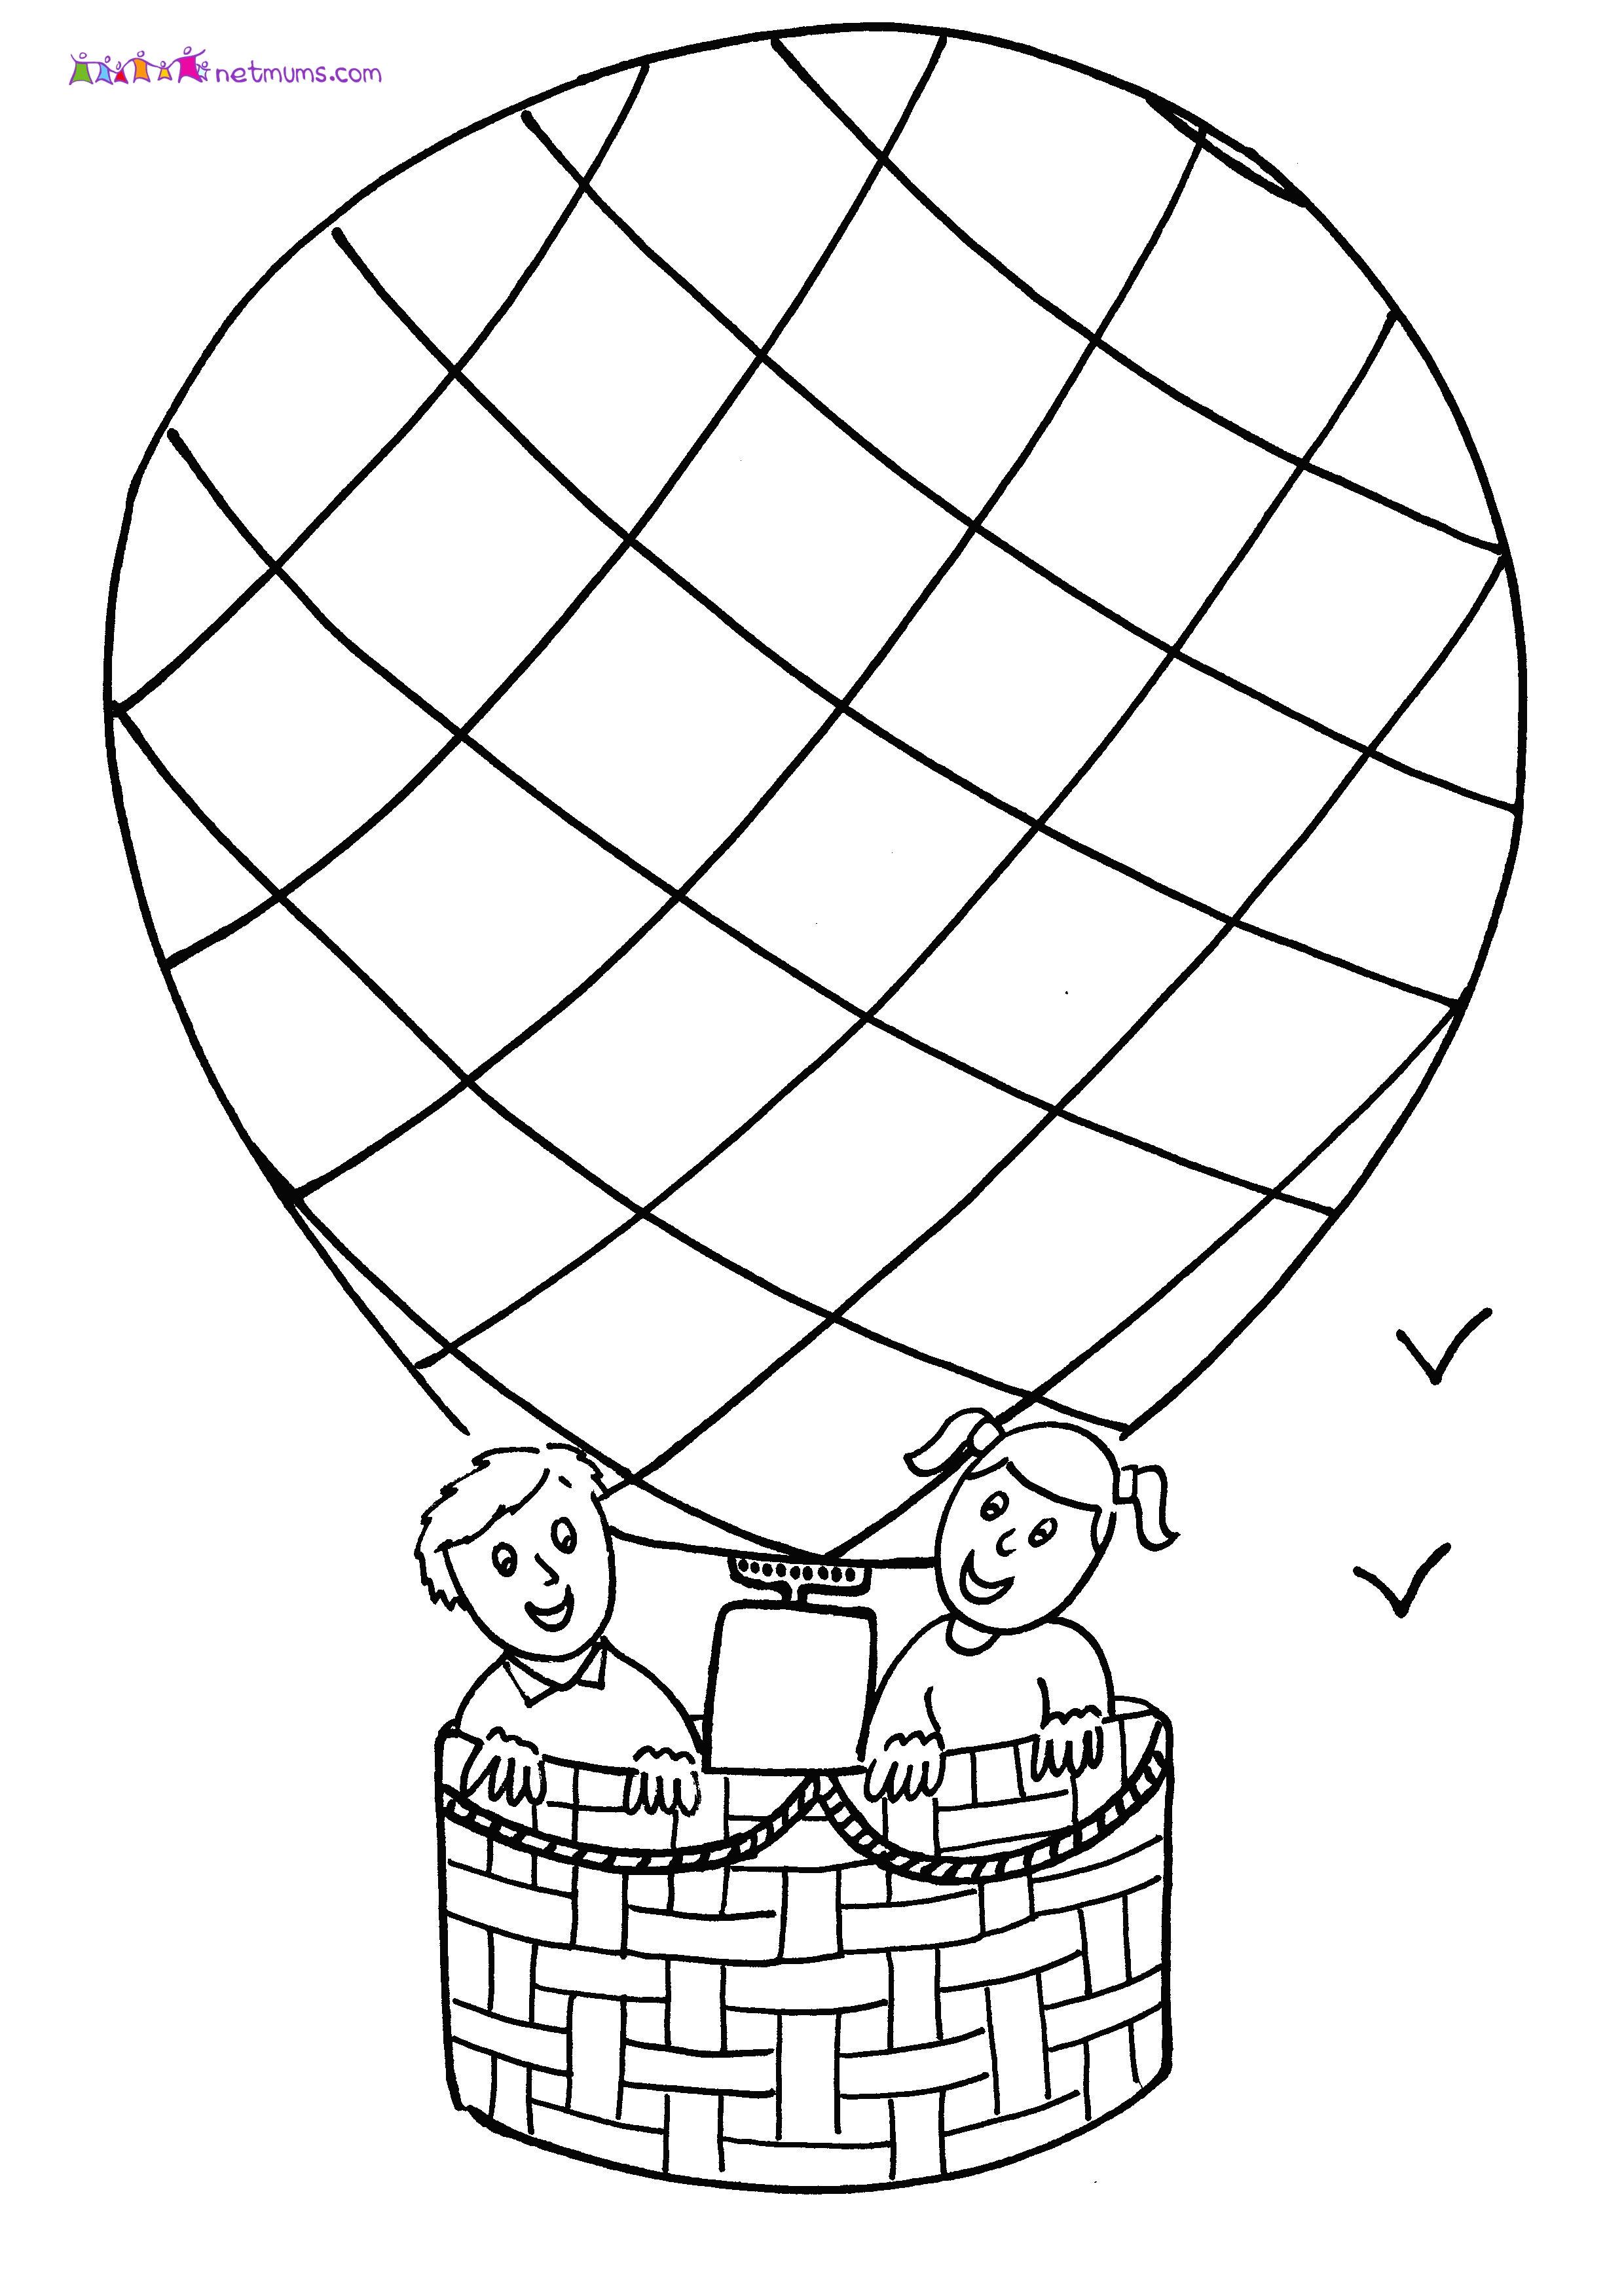 Free Hot Air Balloon Coloring Pages Free Printable Download Free Hot Air Balloon Coloring Pages Free Printable Png Images Free Cliparts On Clipart Library